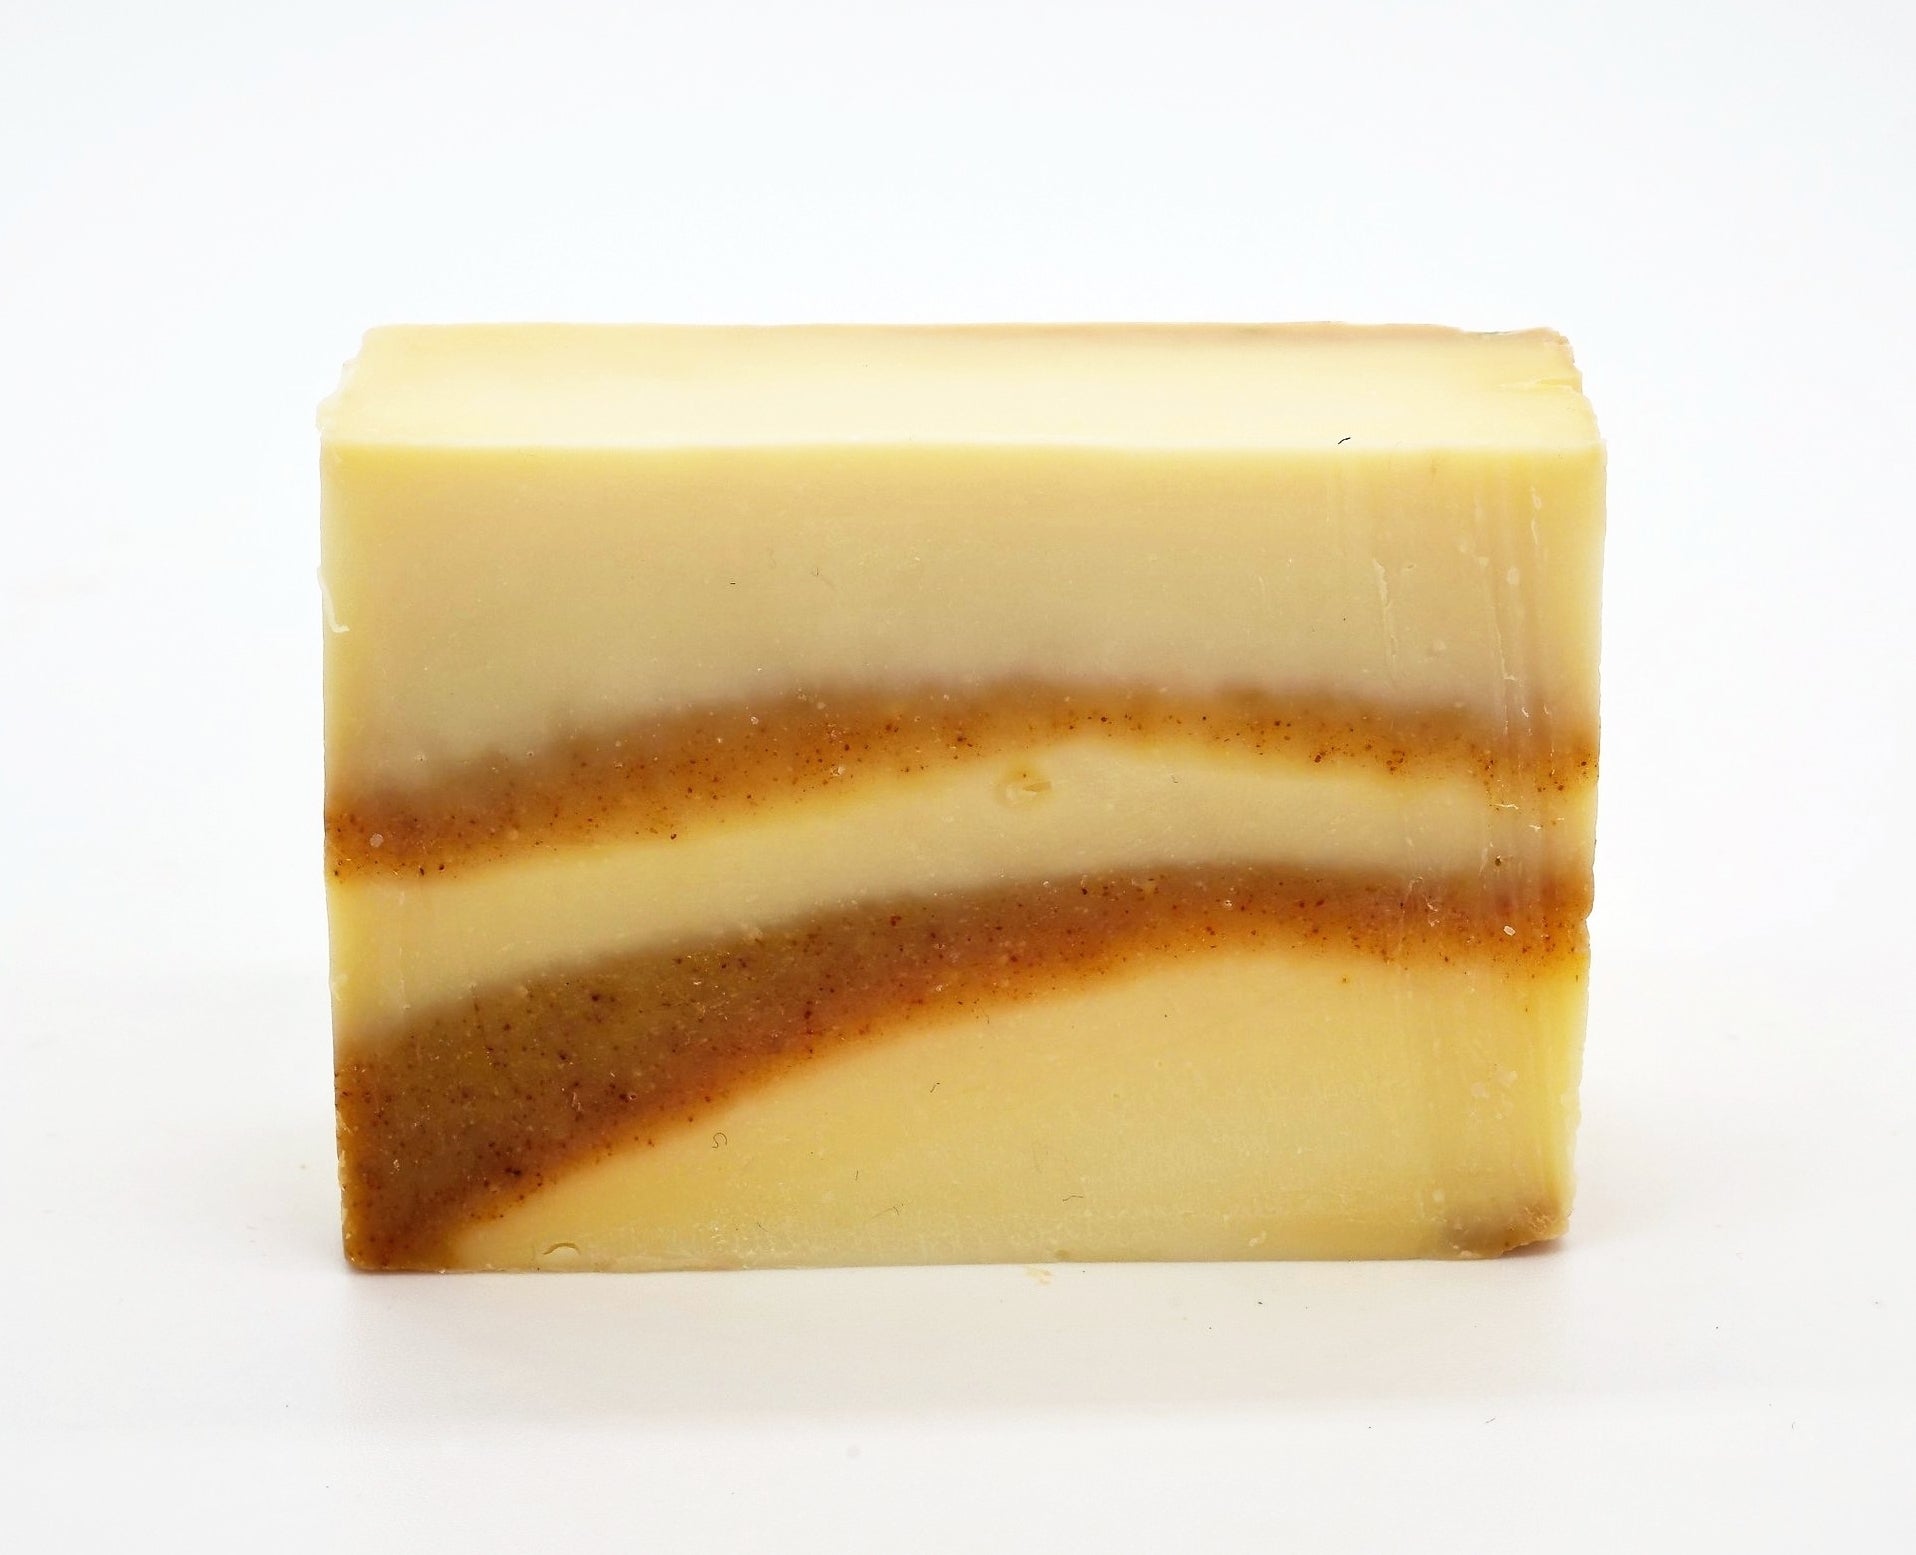 Picture of Read the Label Rise and Shine Soap 100g